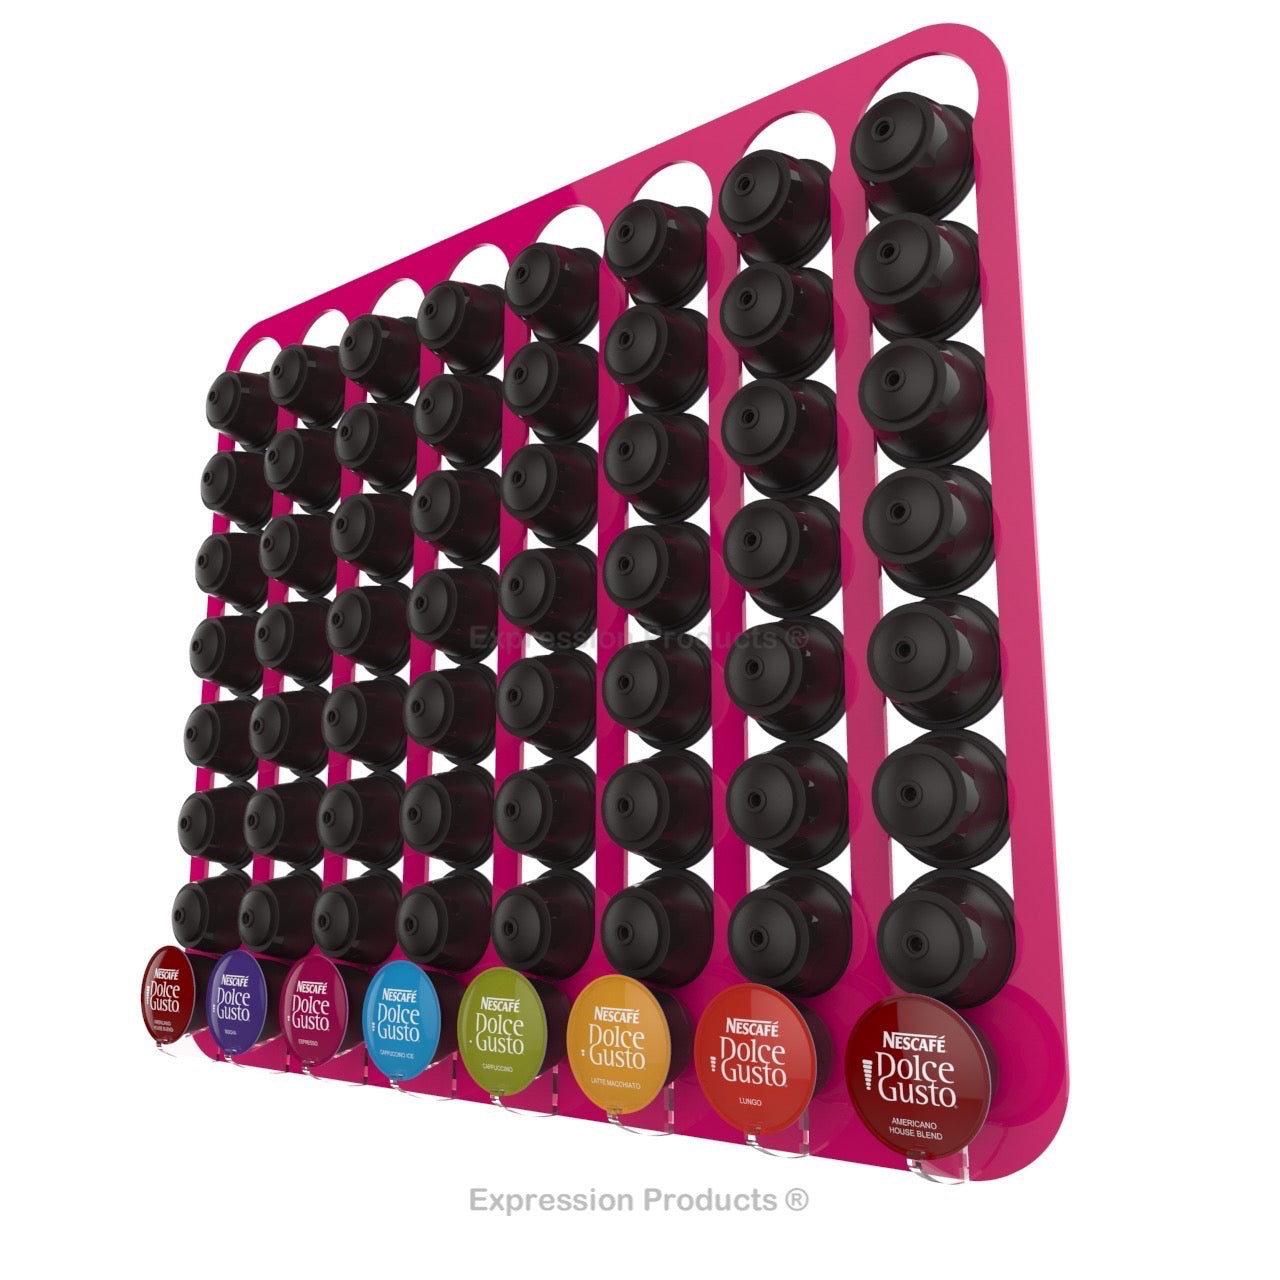 Dolce Gusto Coffee Pod Holder, Wall Mounted.  Shown in Pink Holding 64 Pods